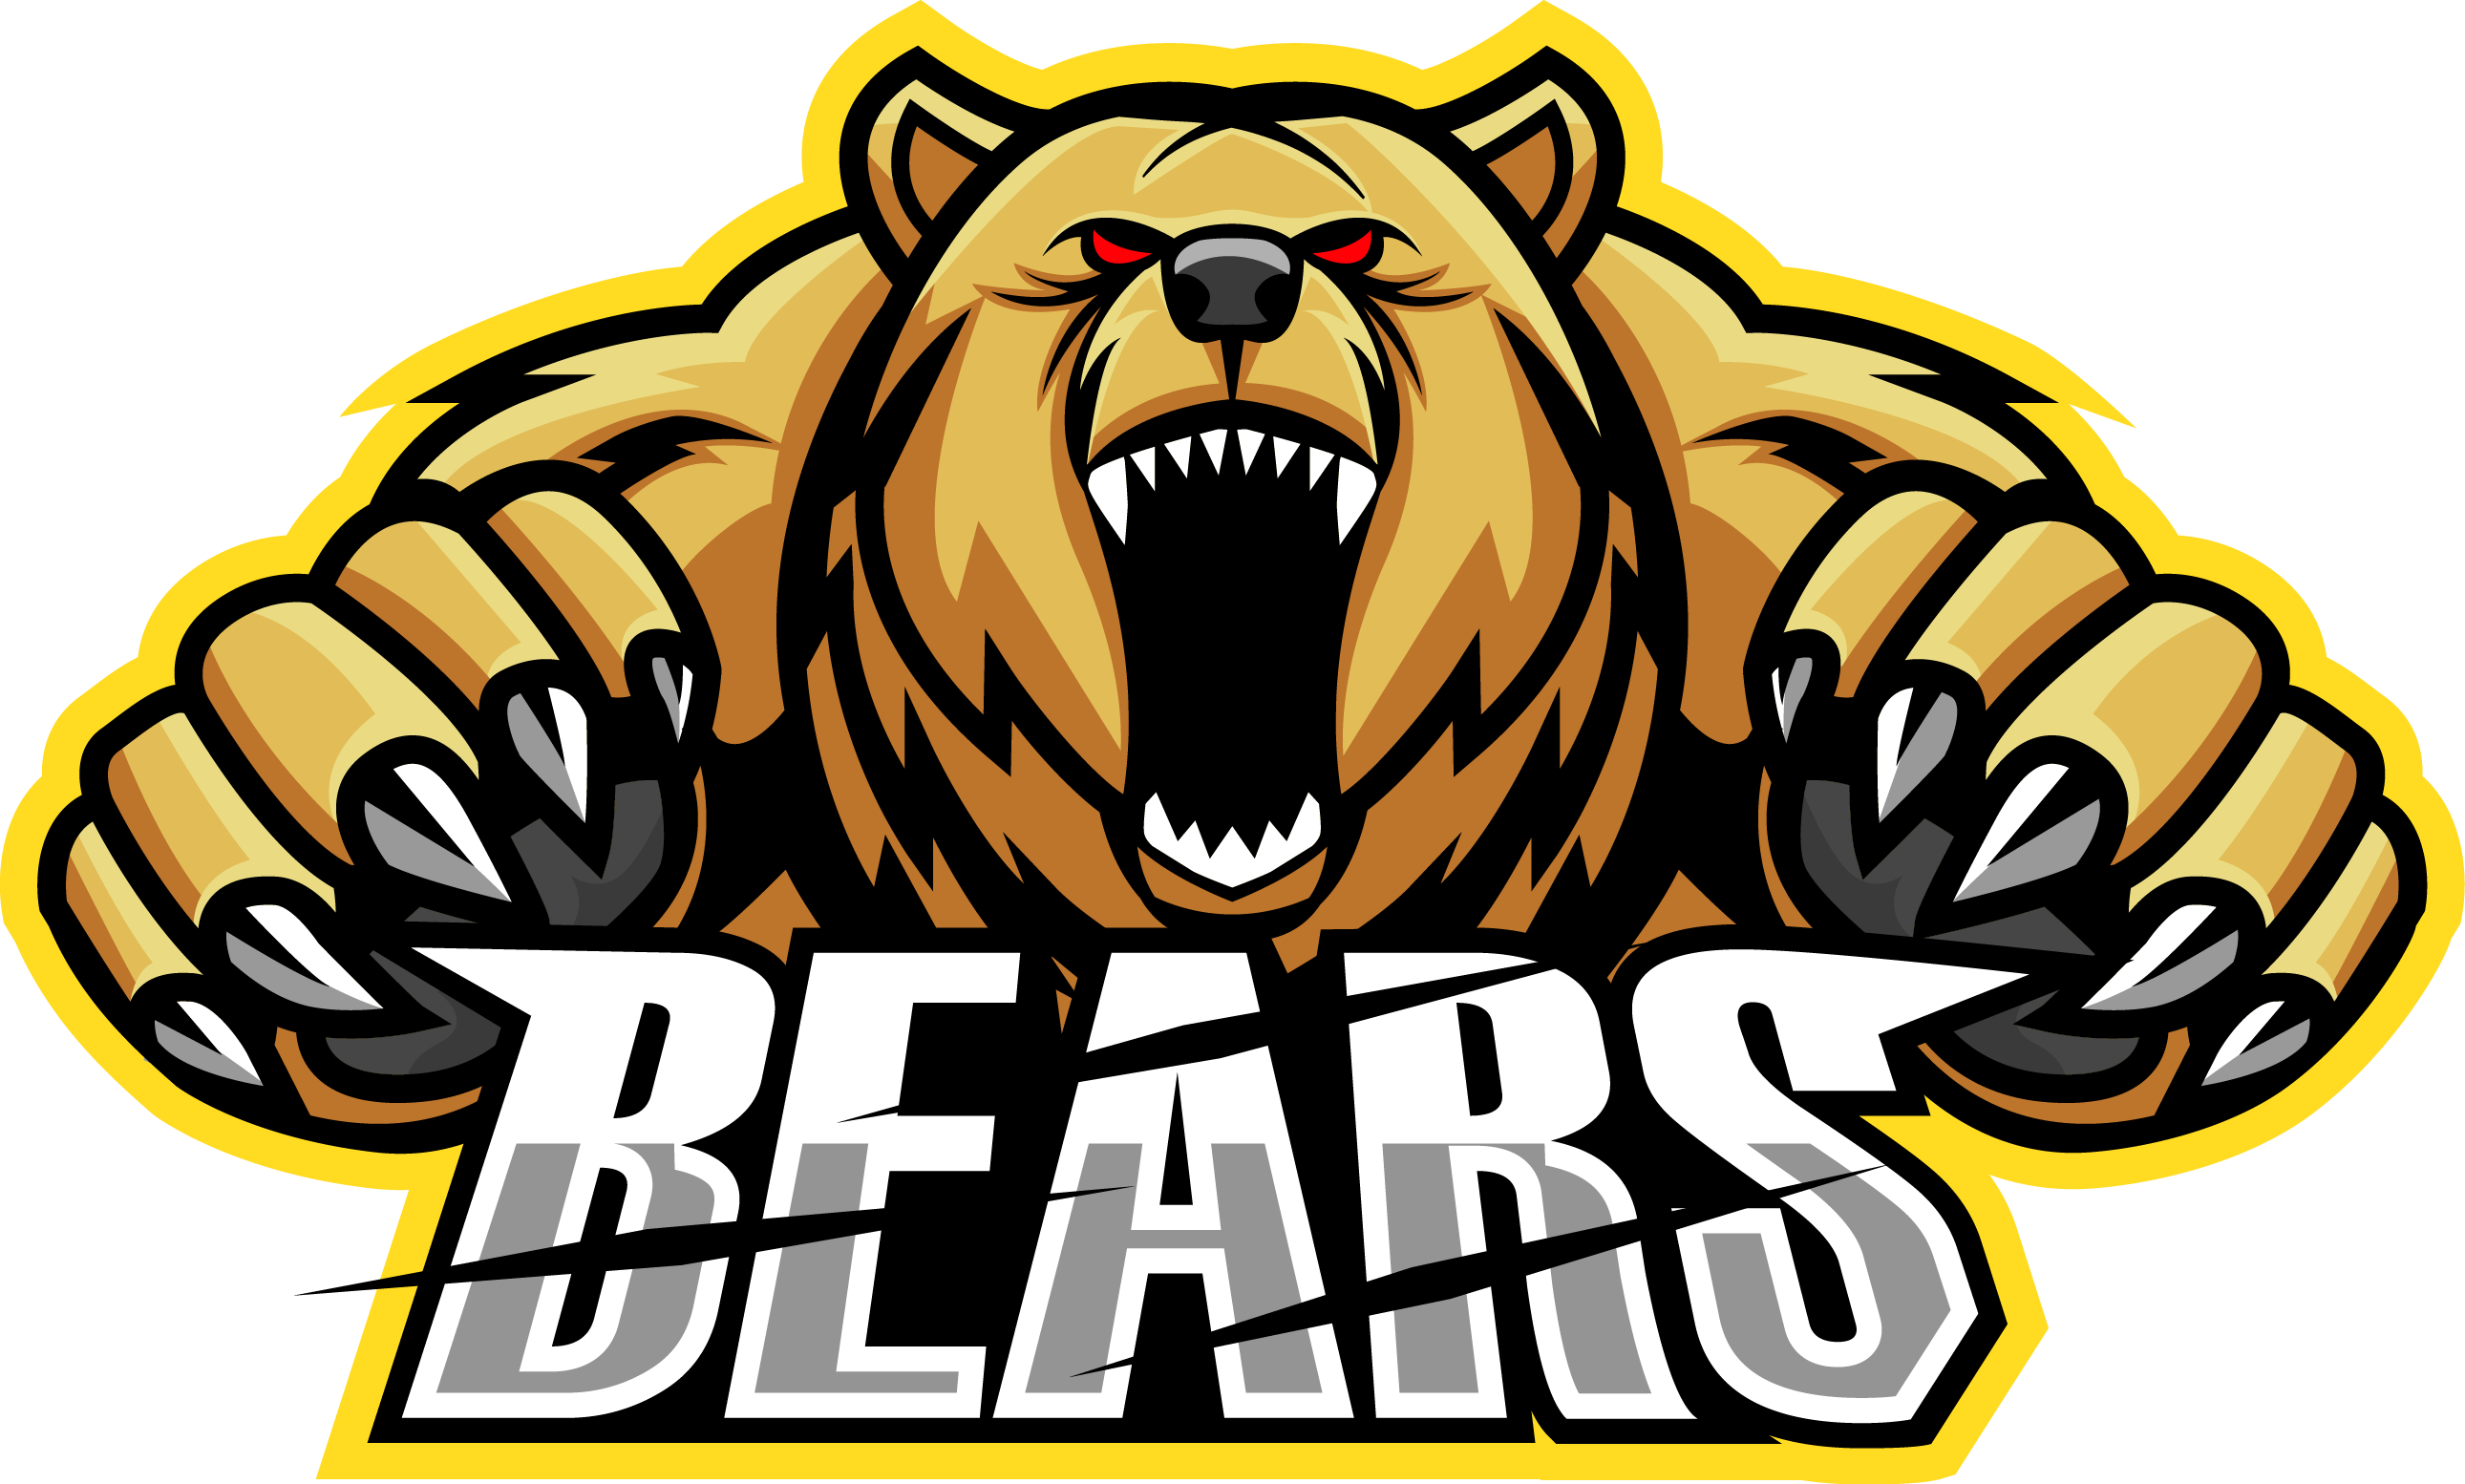 Modern professional angry bears mascot logo design By Visink ...